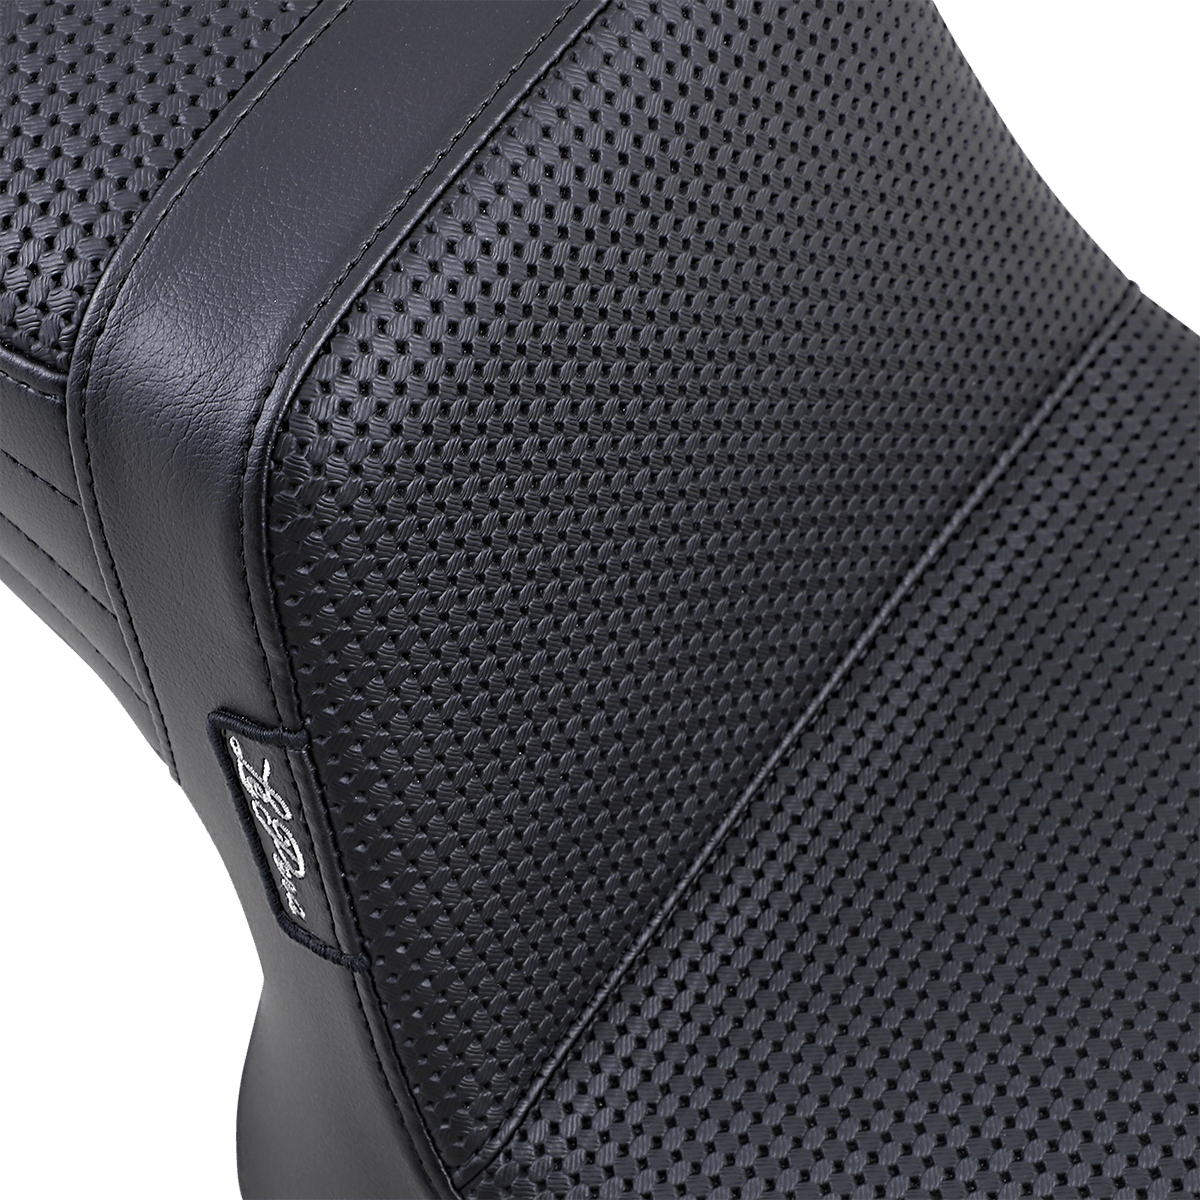 LE PERA-Tailwhip Seat / '82-'00 FXR-Seats-MetalCore Harley Supply